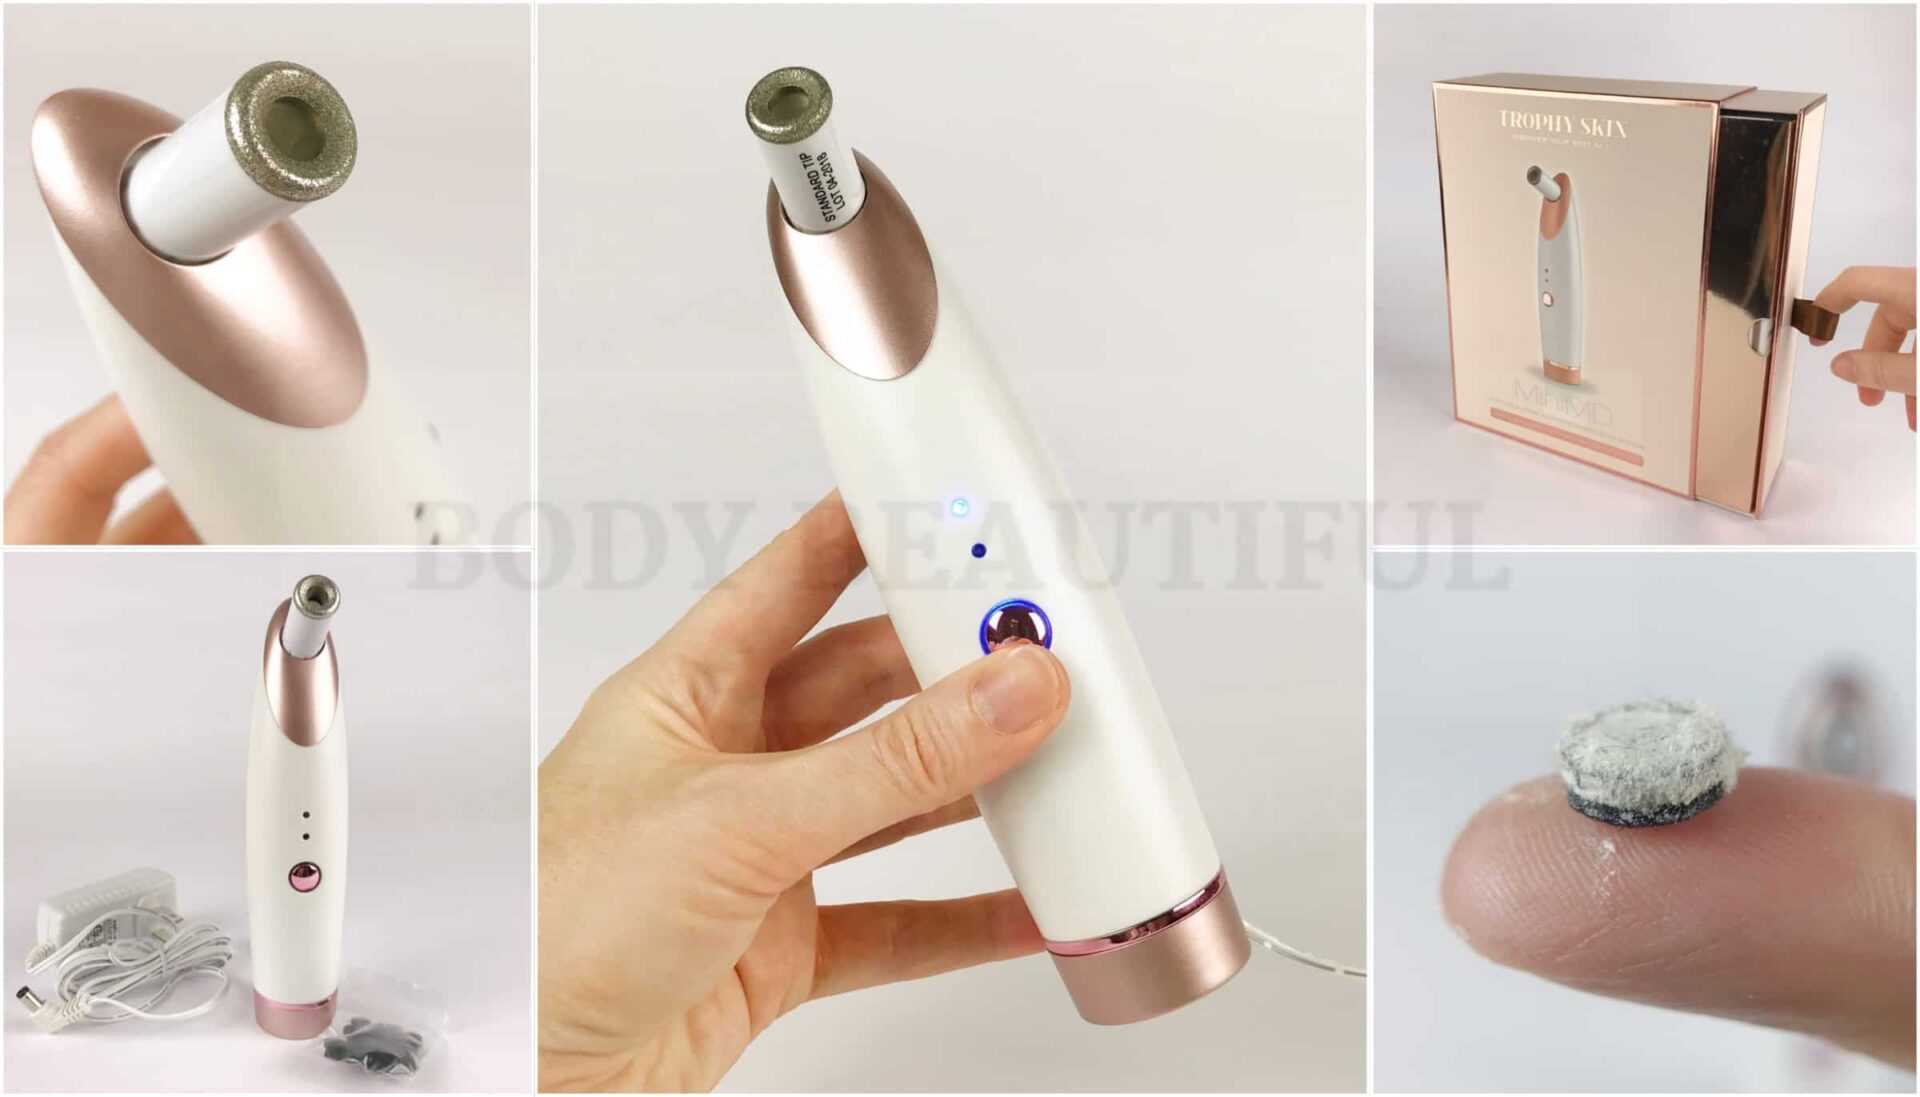 Learn all about home microdermabrasion in WeAreBodyBeutiful's review of the Trophyskin mminiD